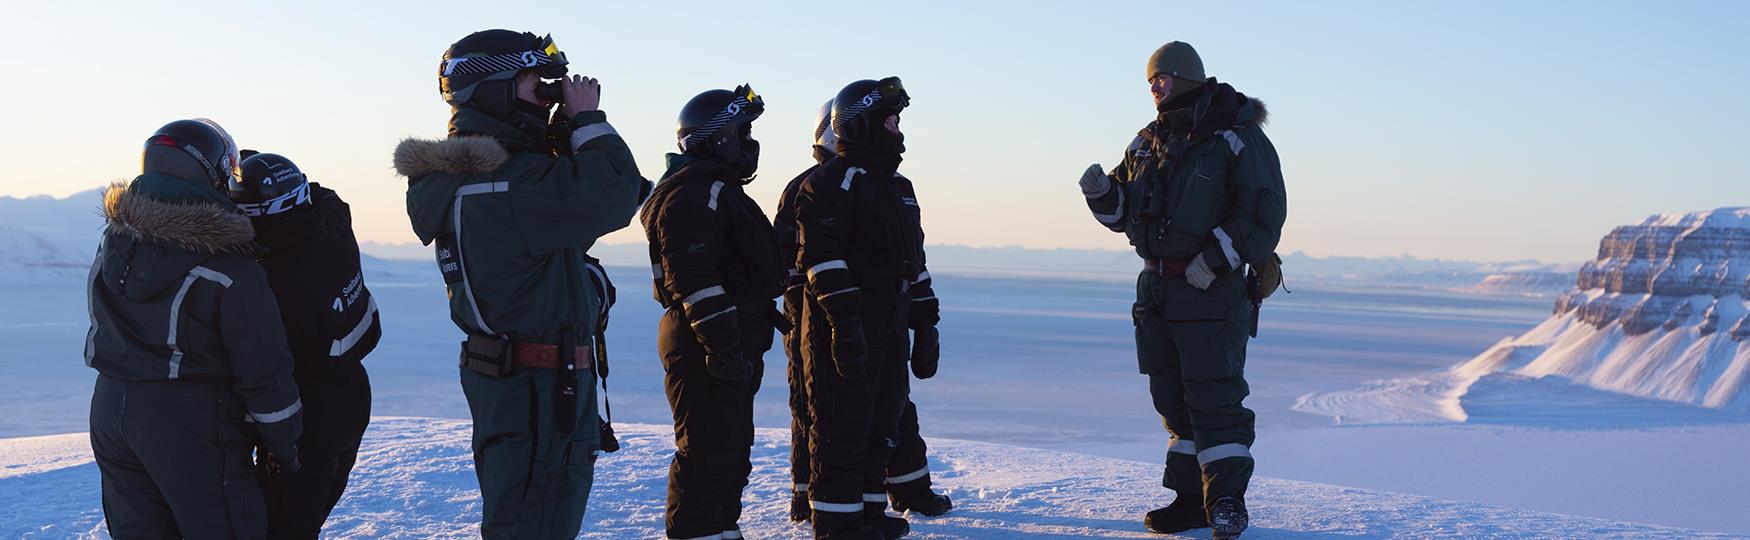 The local guides of Svalbard